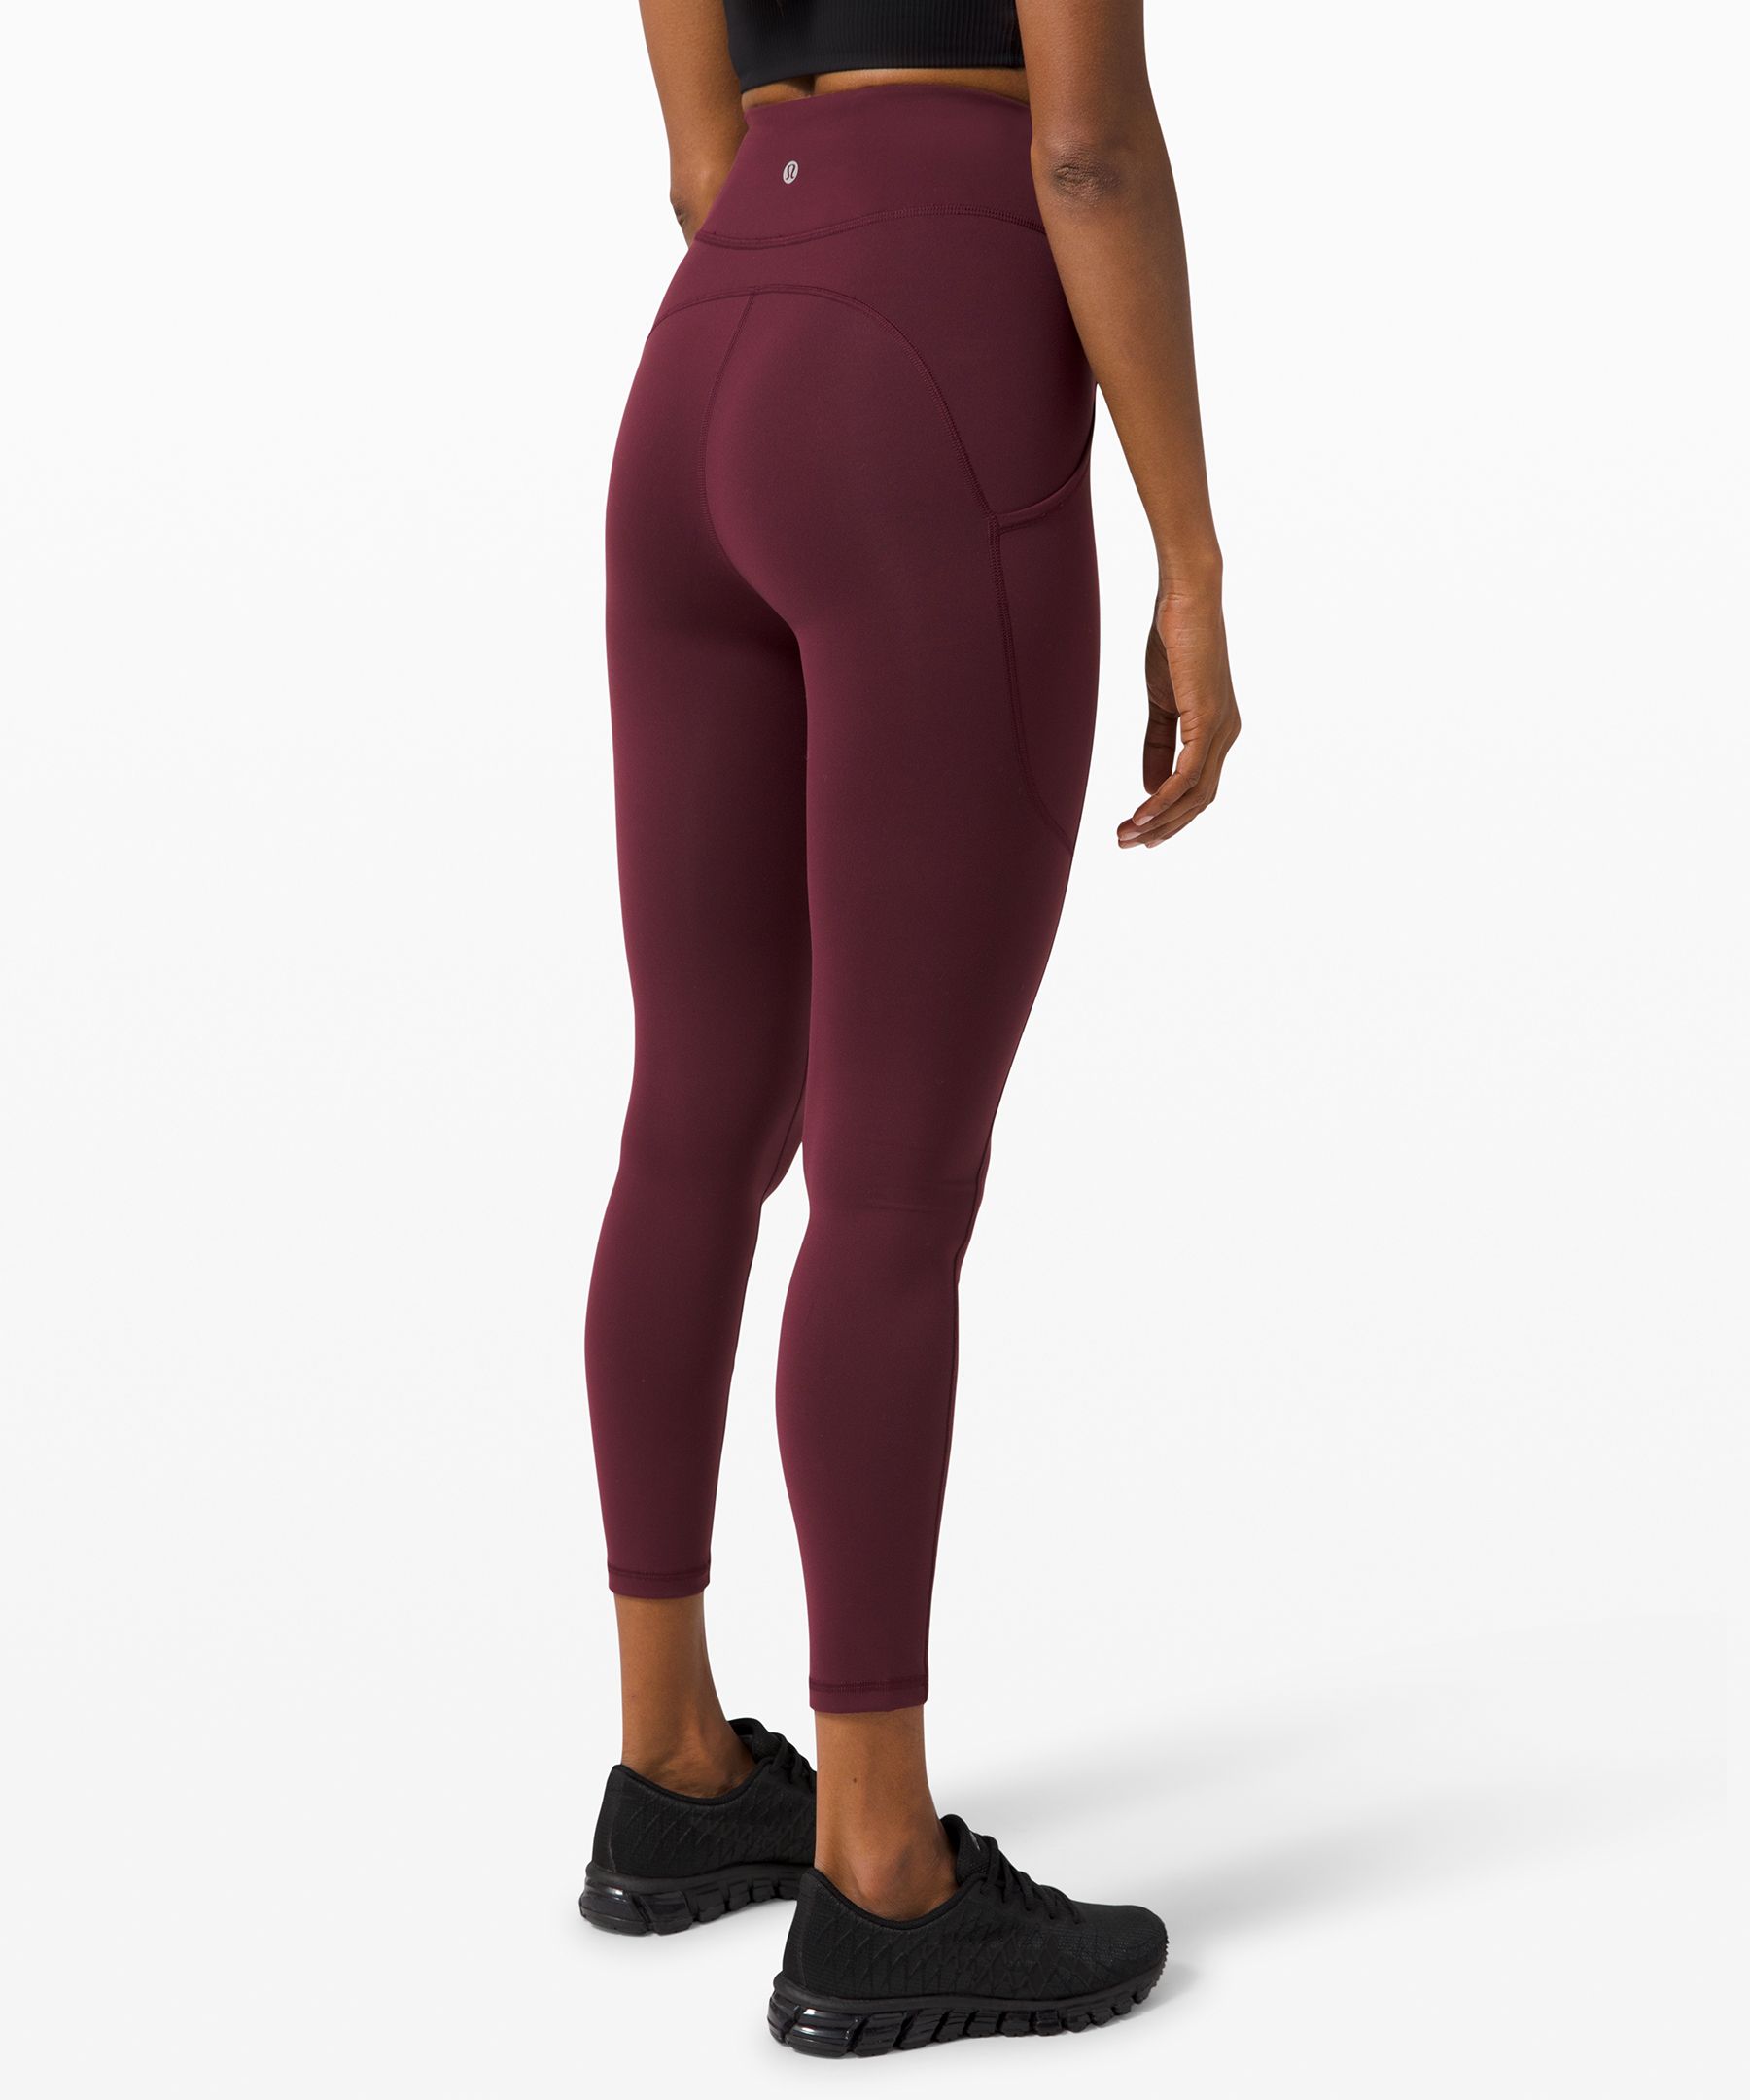 Lululemon's Invigorate Tights Are My Go-To Leggings for Every Activity